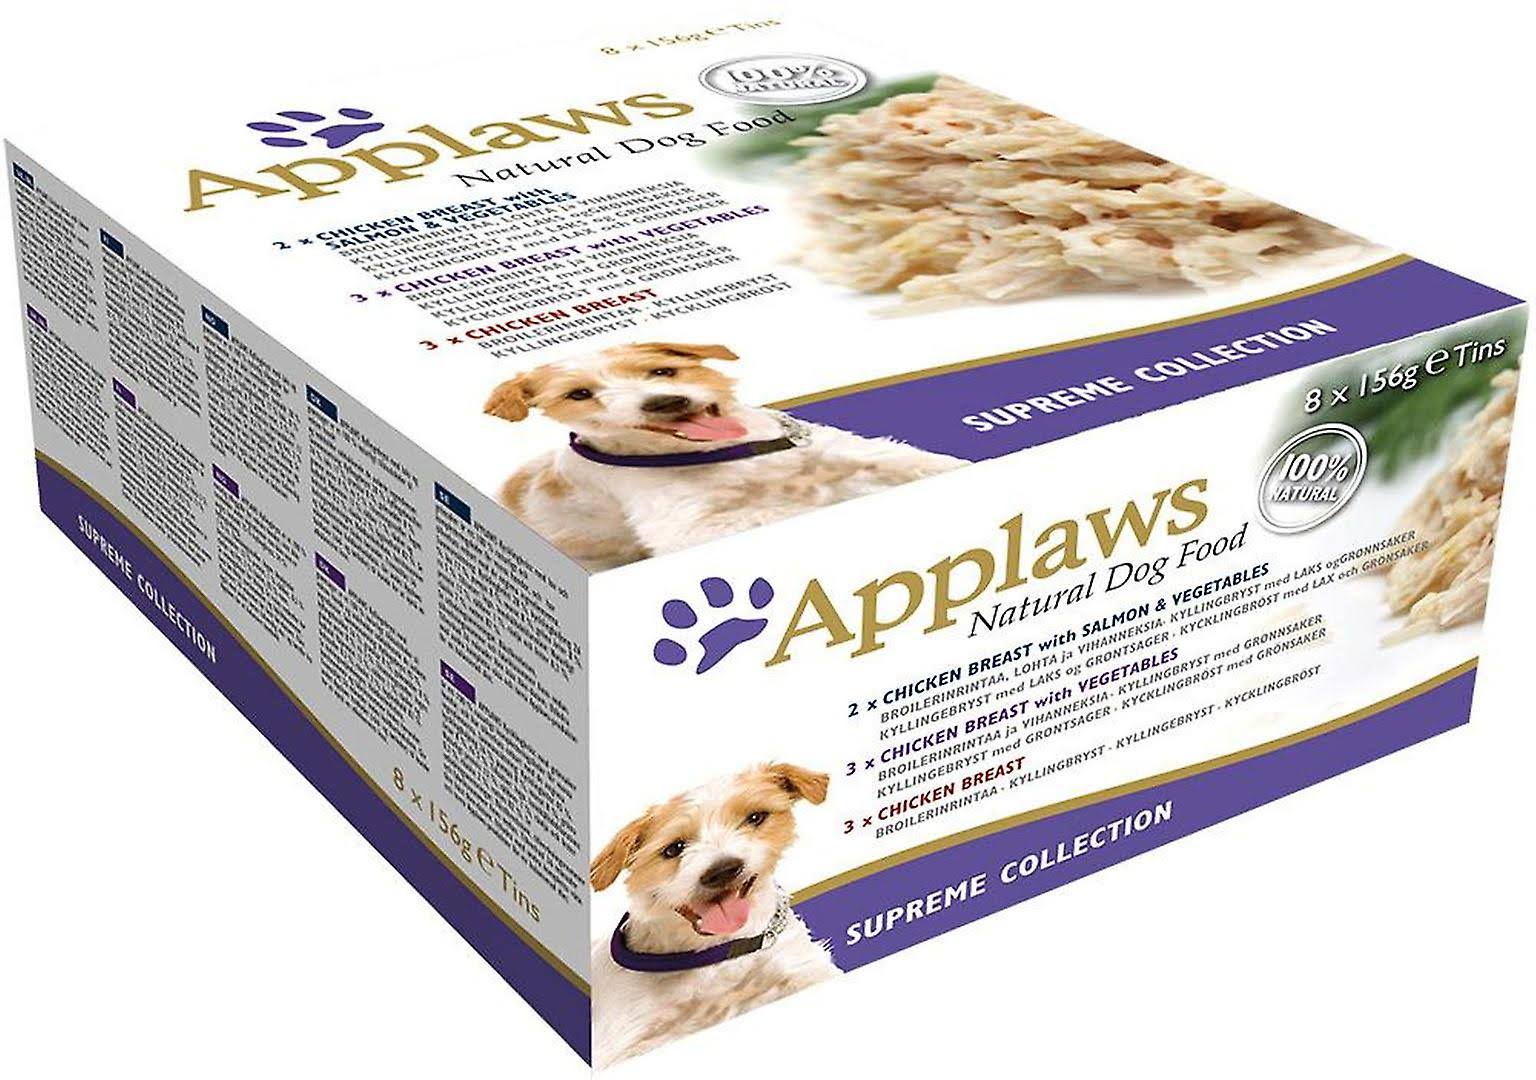 Applaws Supreme Collection Multipack Can Adult Dog Food - 156g x 8